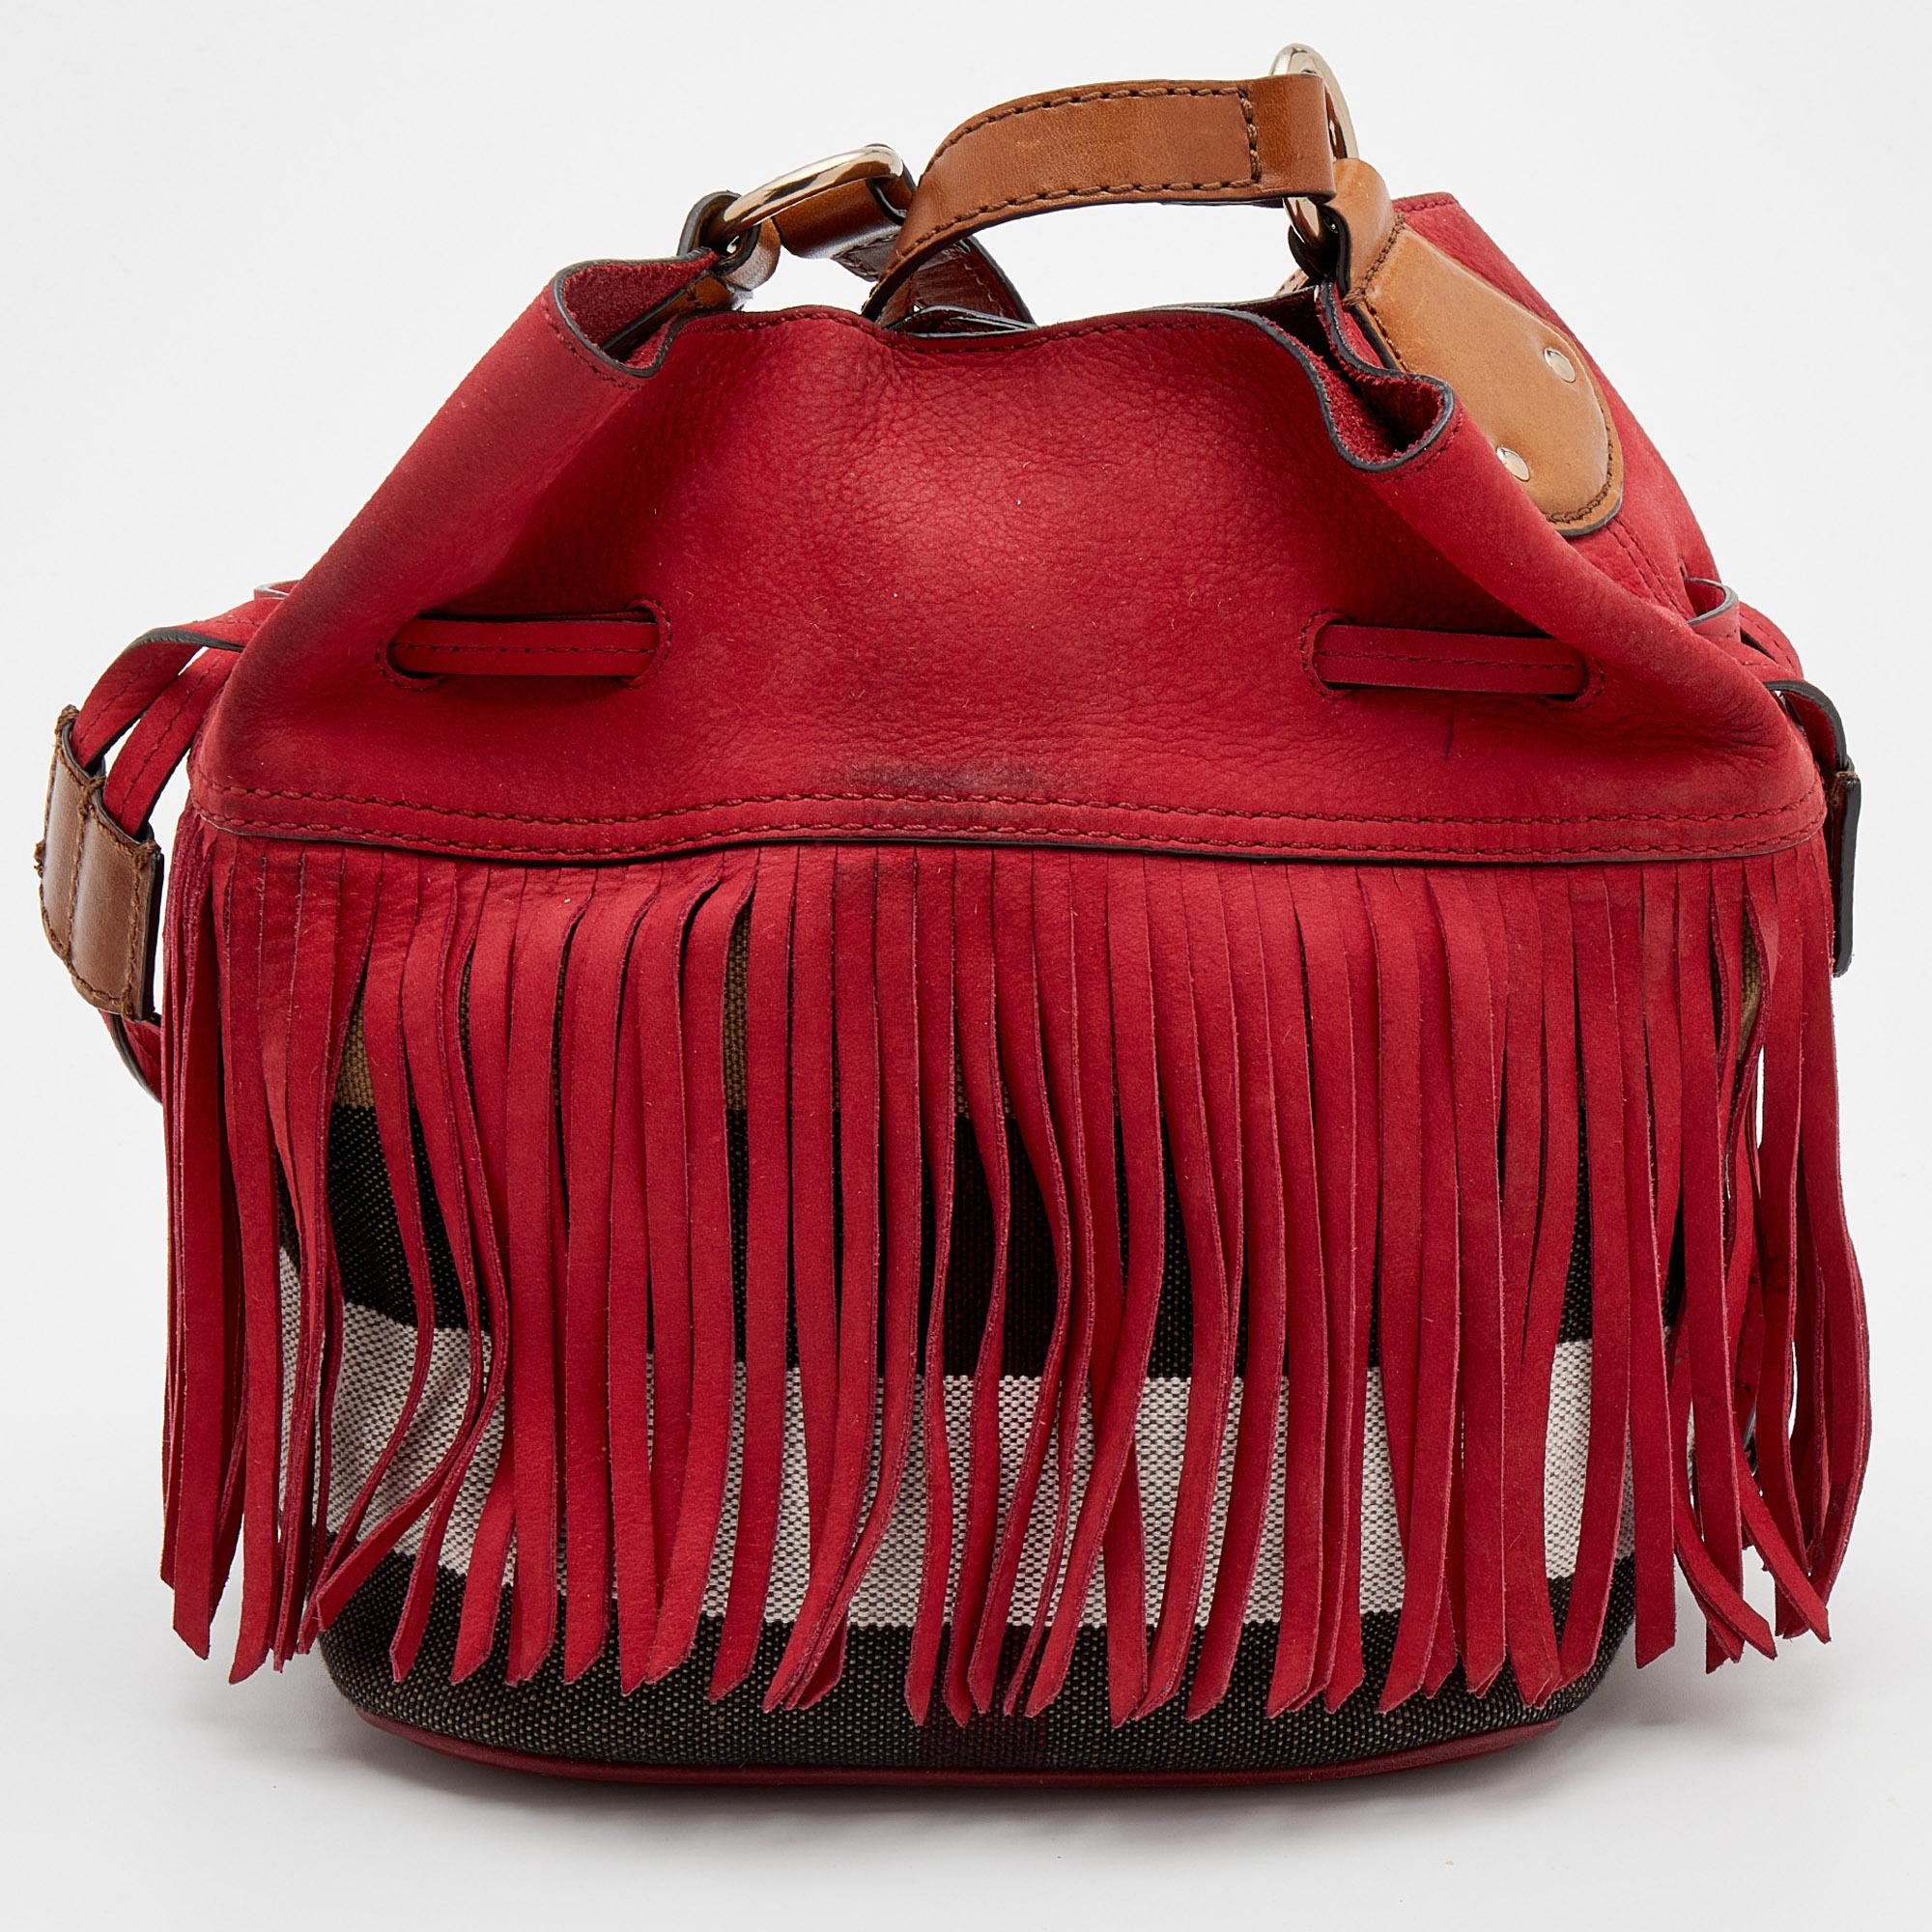 Ensure your day's essentials are in order and your outfit is complete with this Burberry bag. Crafted using leather, suede, and canvas, the bag has a shoulder strap, fringe details, and a lined interior.

